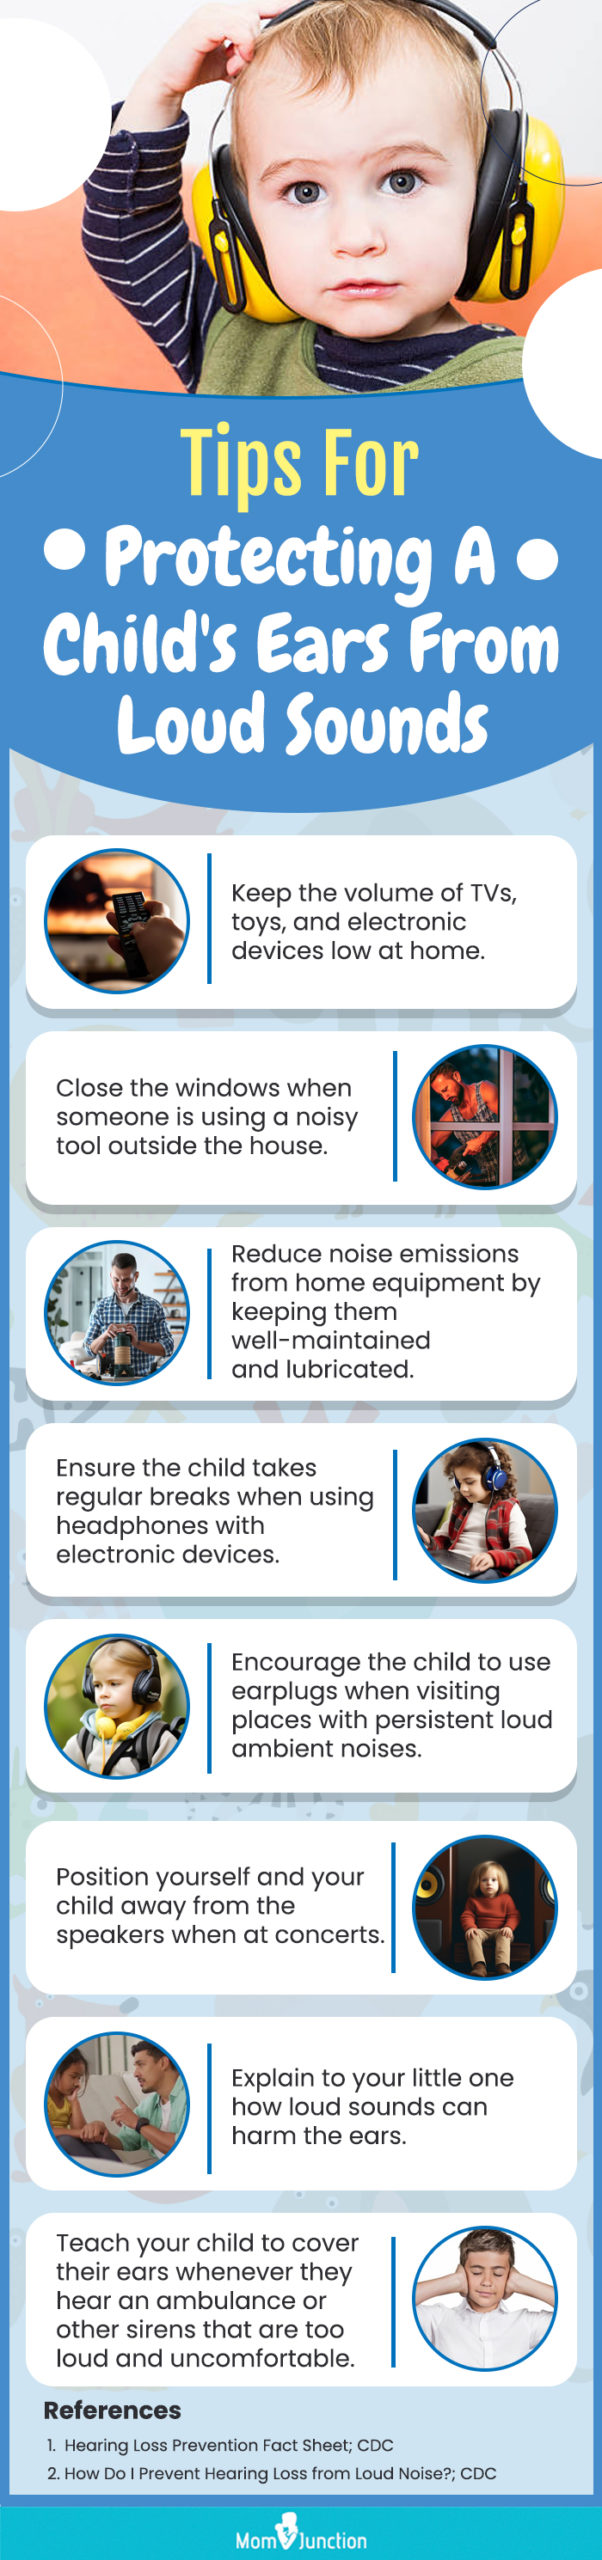 Tips For Protecting A Child's Ears From Loud Sounds (infographic)